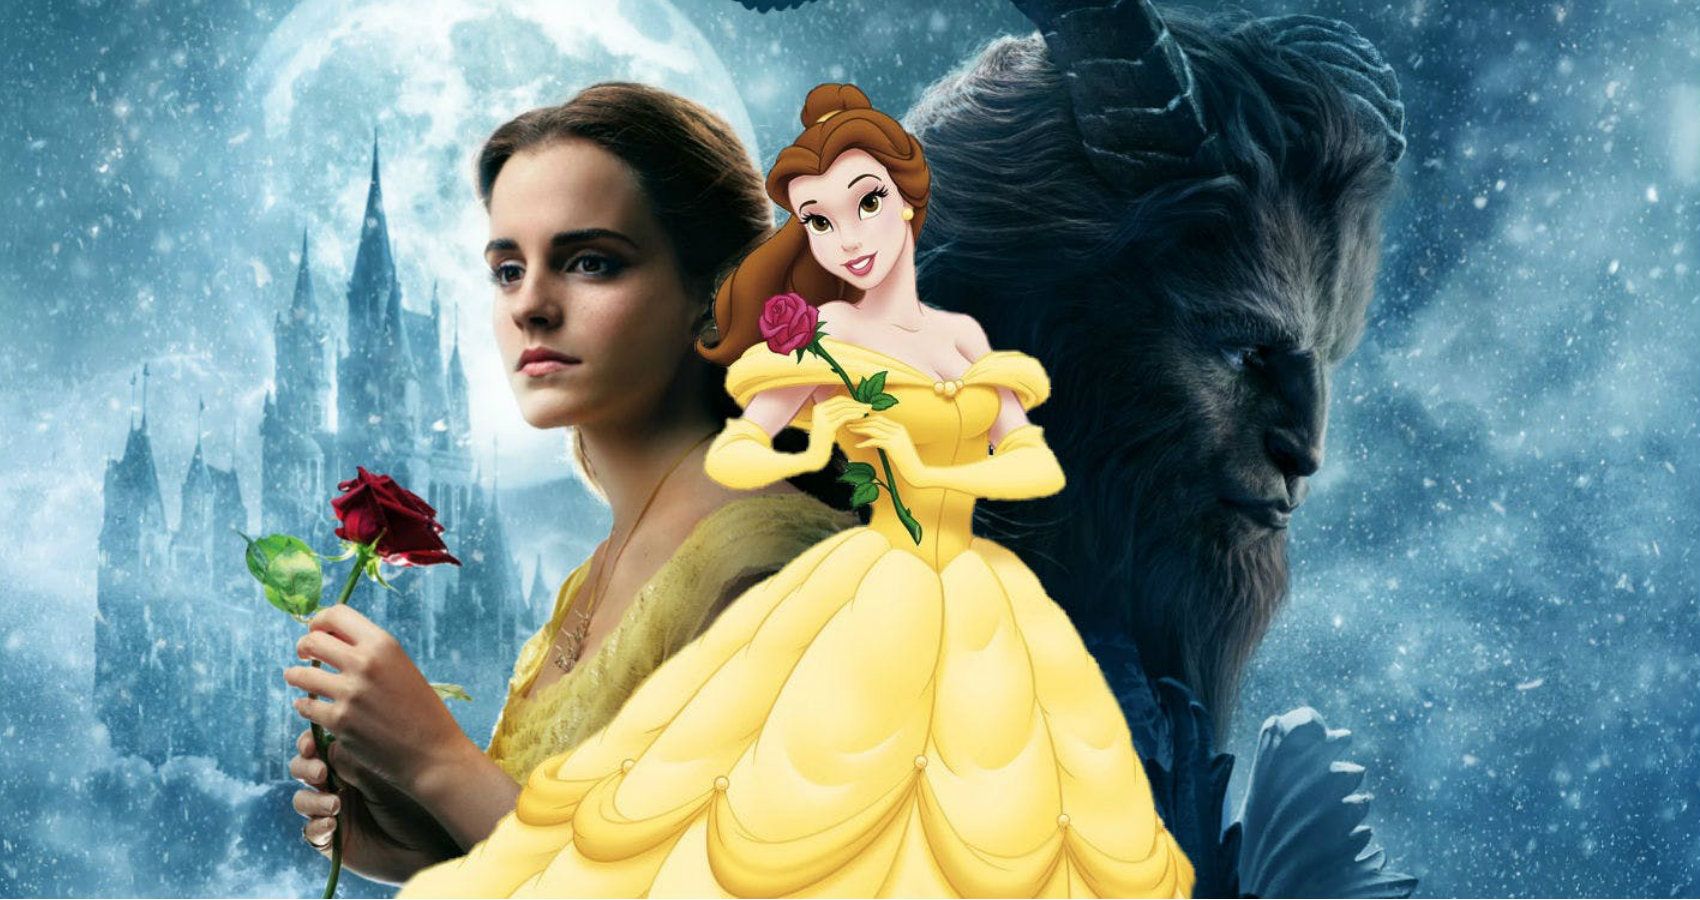 Beauty And The Beast: 10 Big Changes They Made From The Original Disney ...